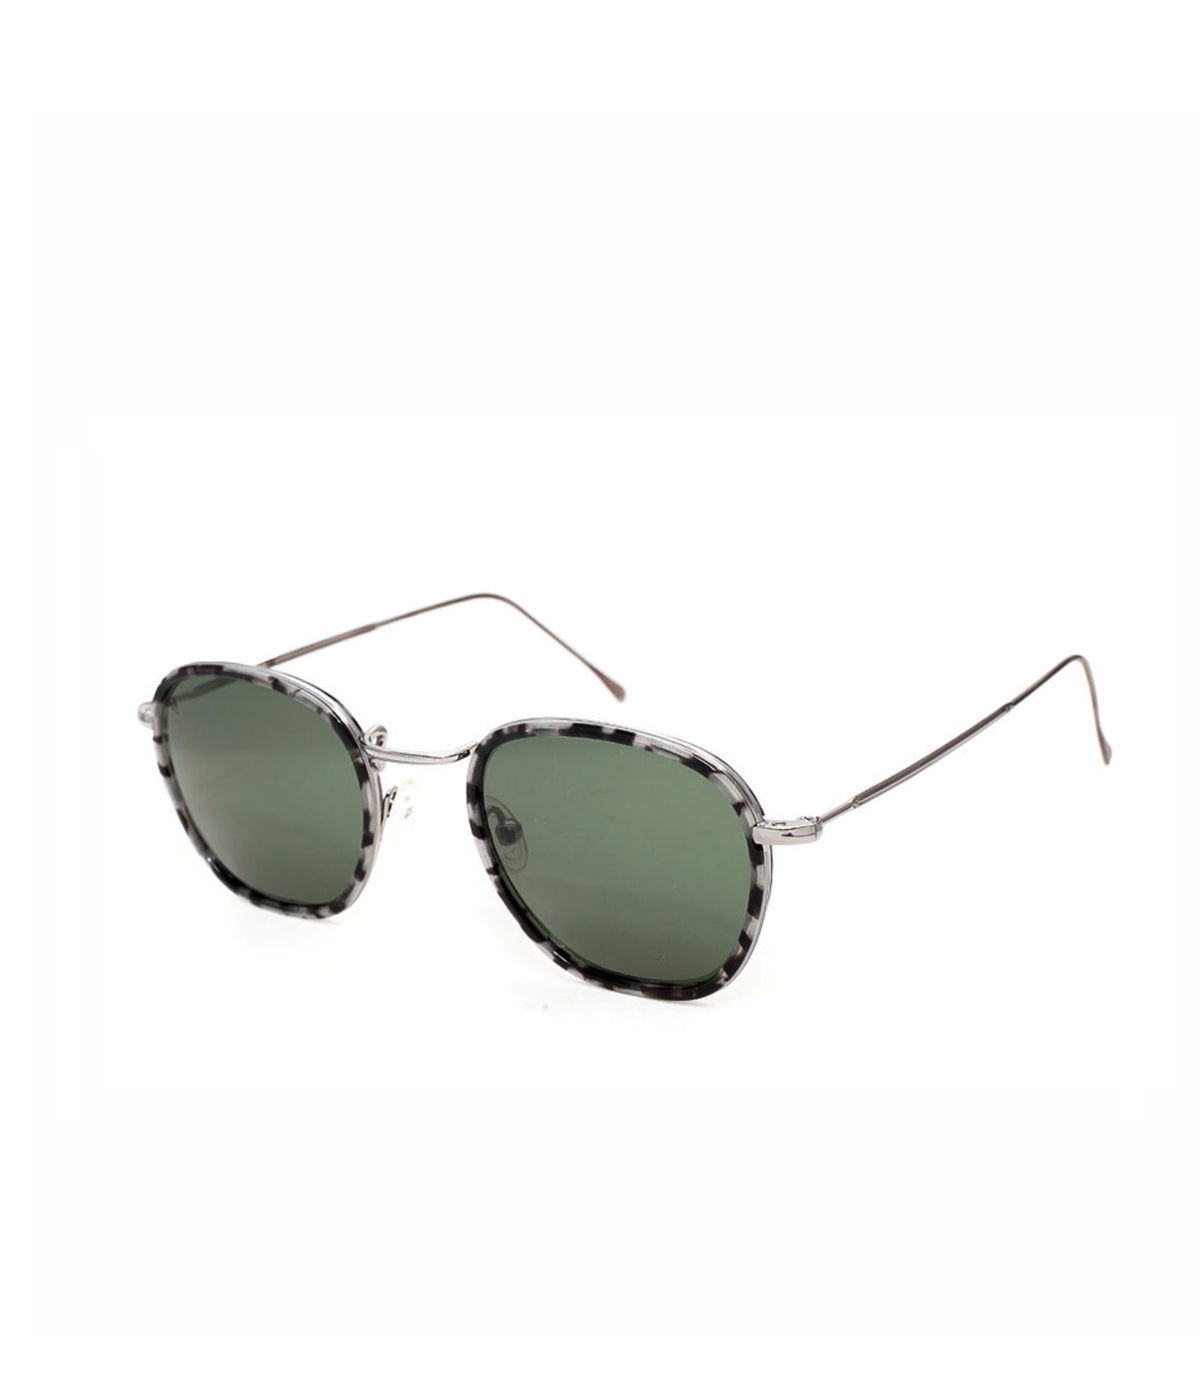 Jaime Sunglasses with Green Lenses and Dark Silver Frames